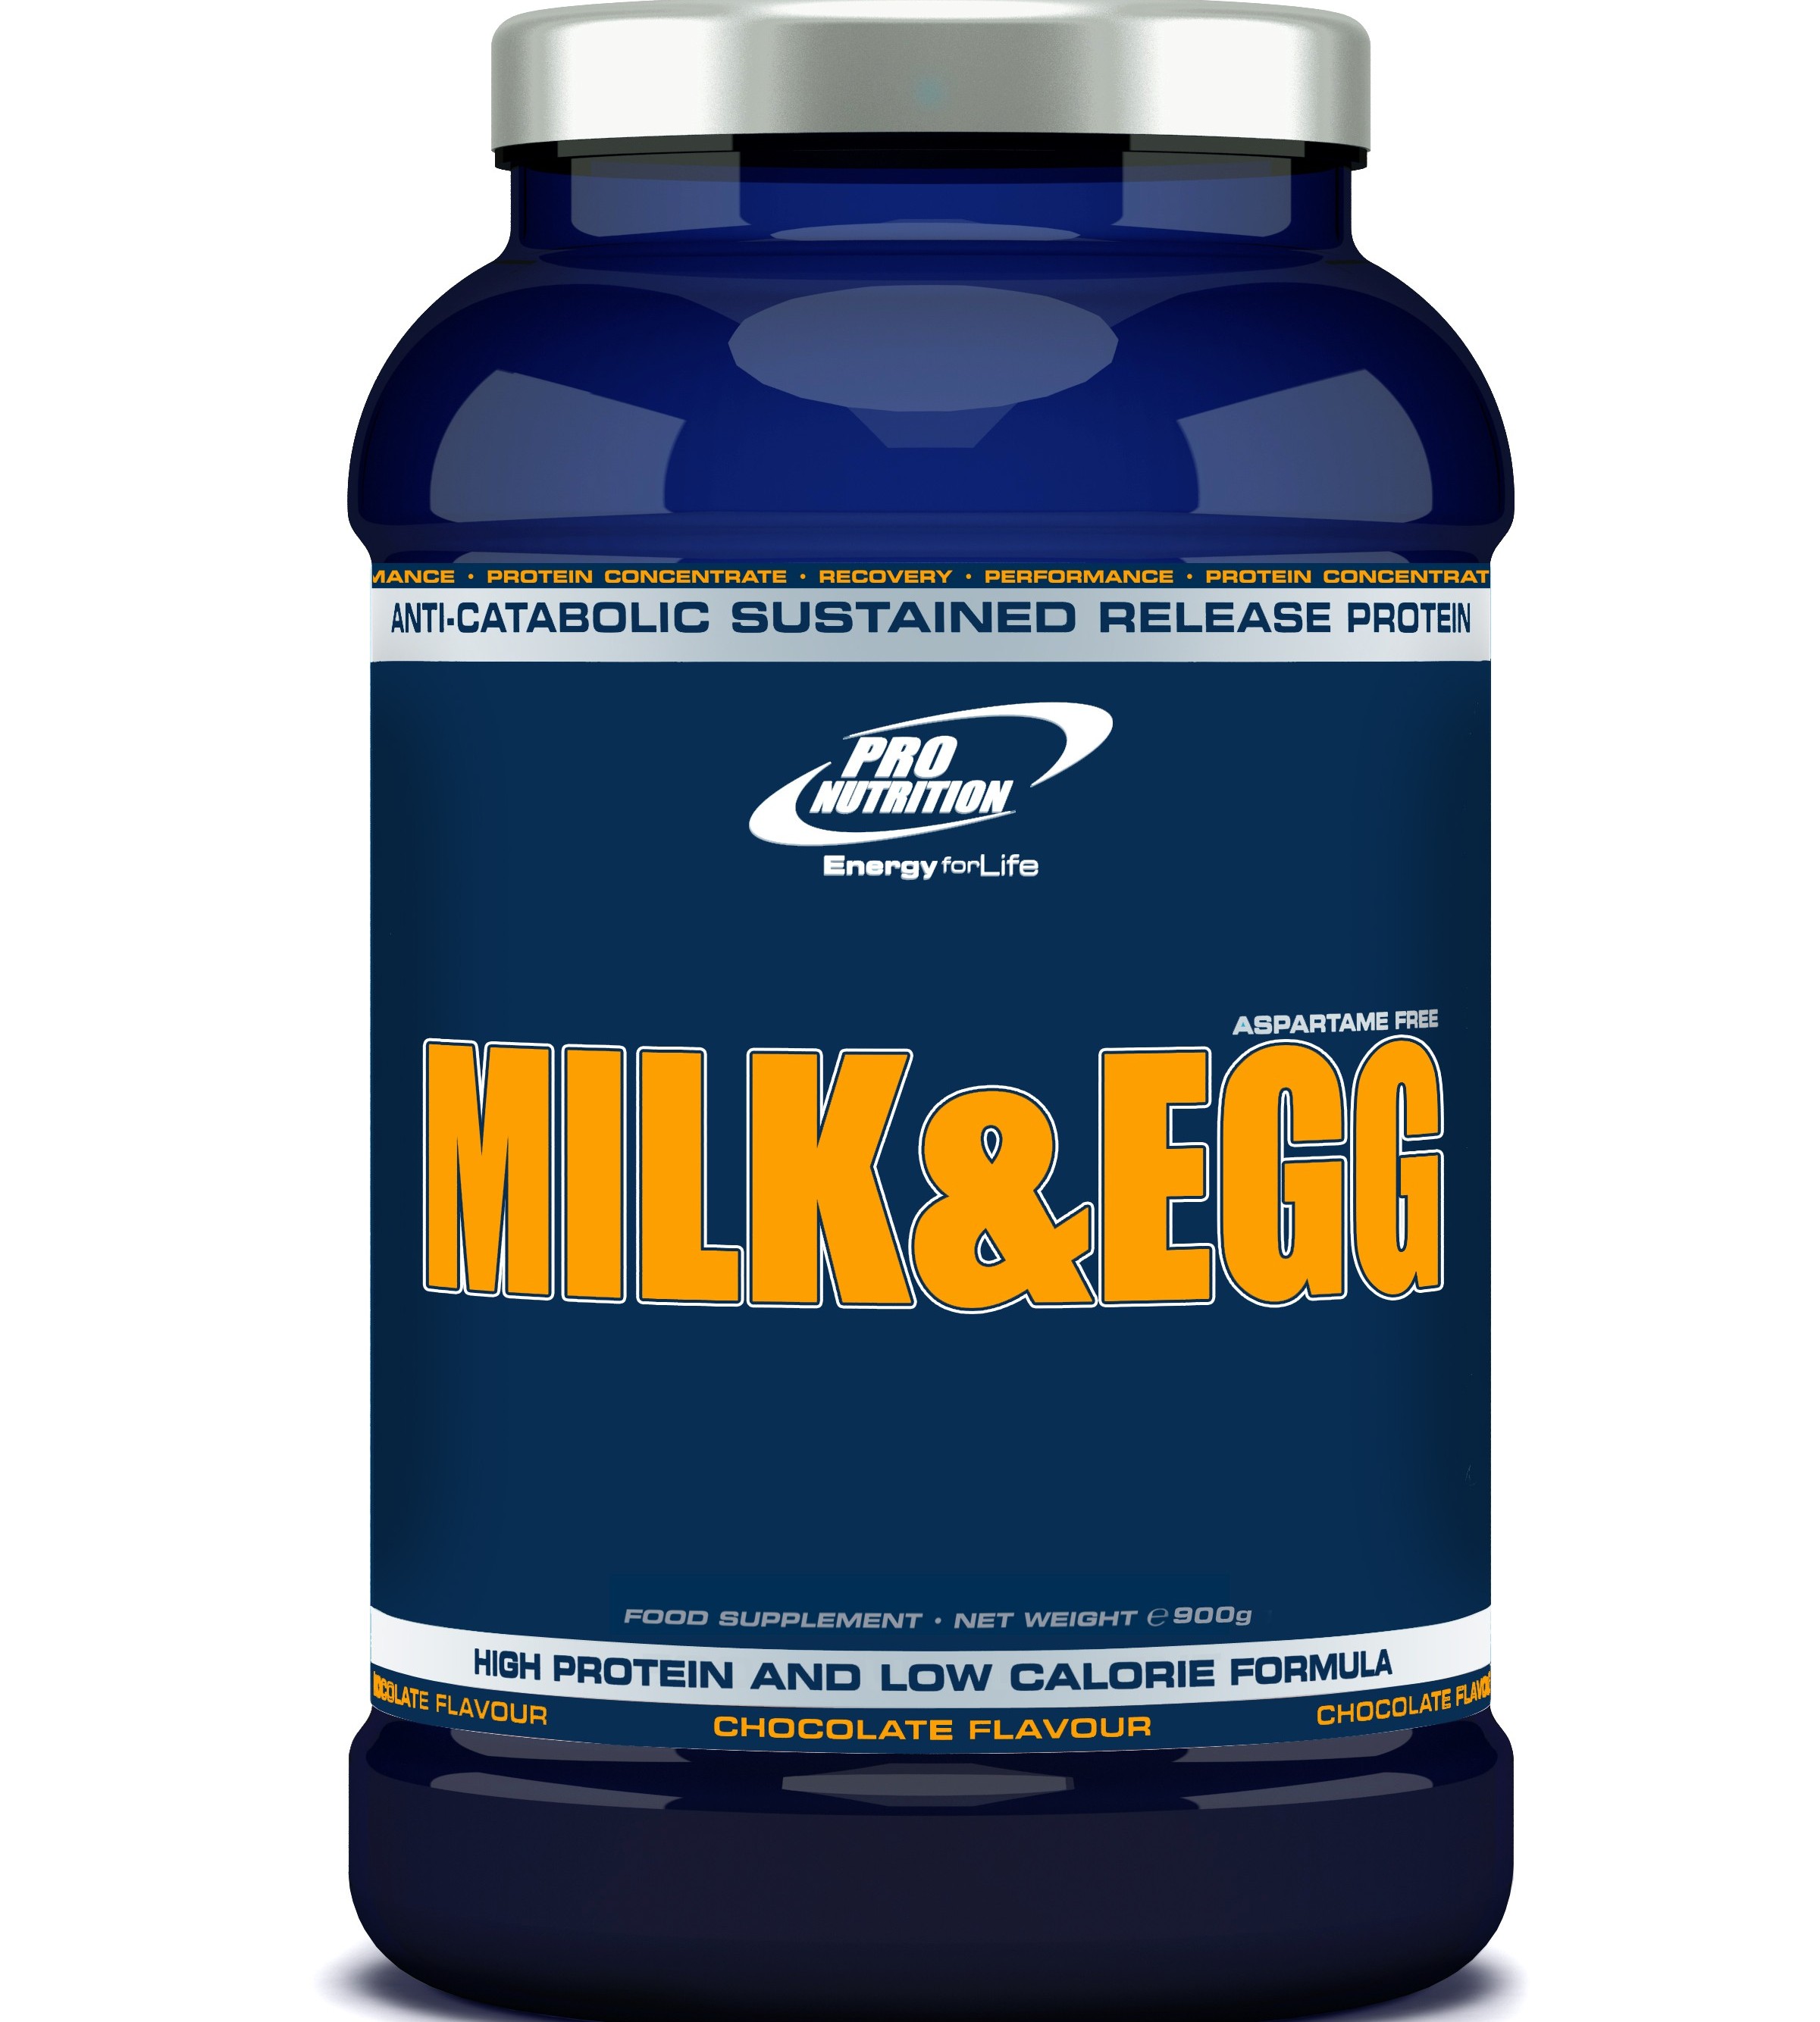 Milk and egg Pro Nutrition